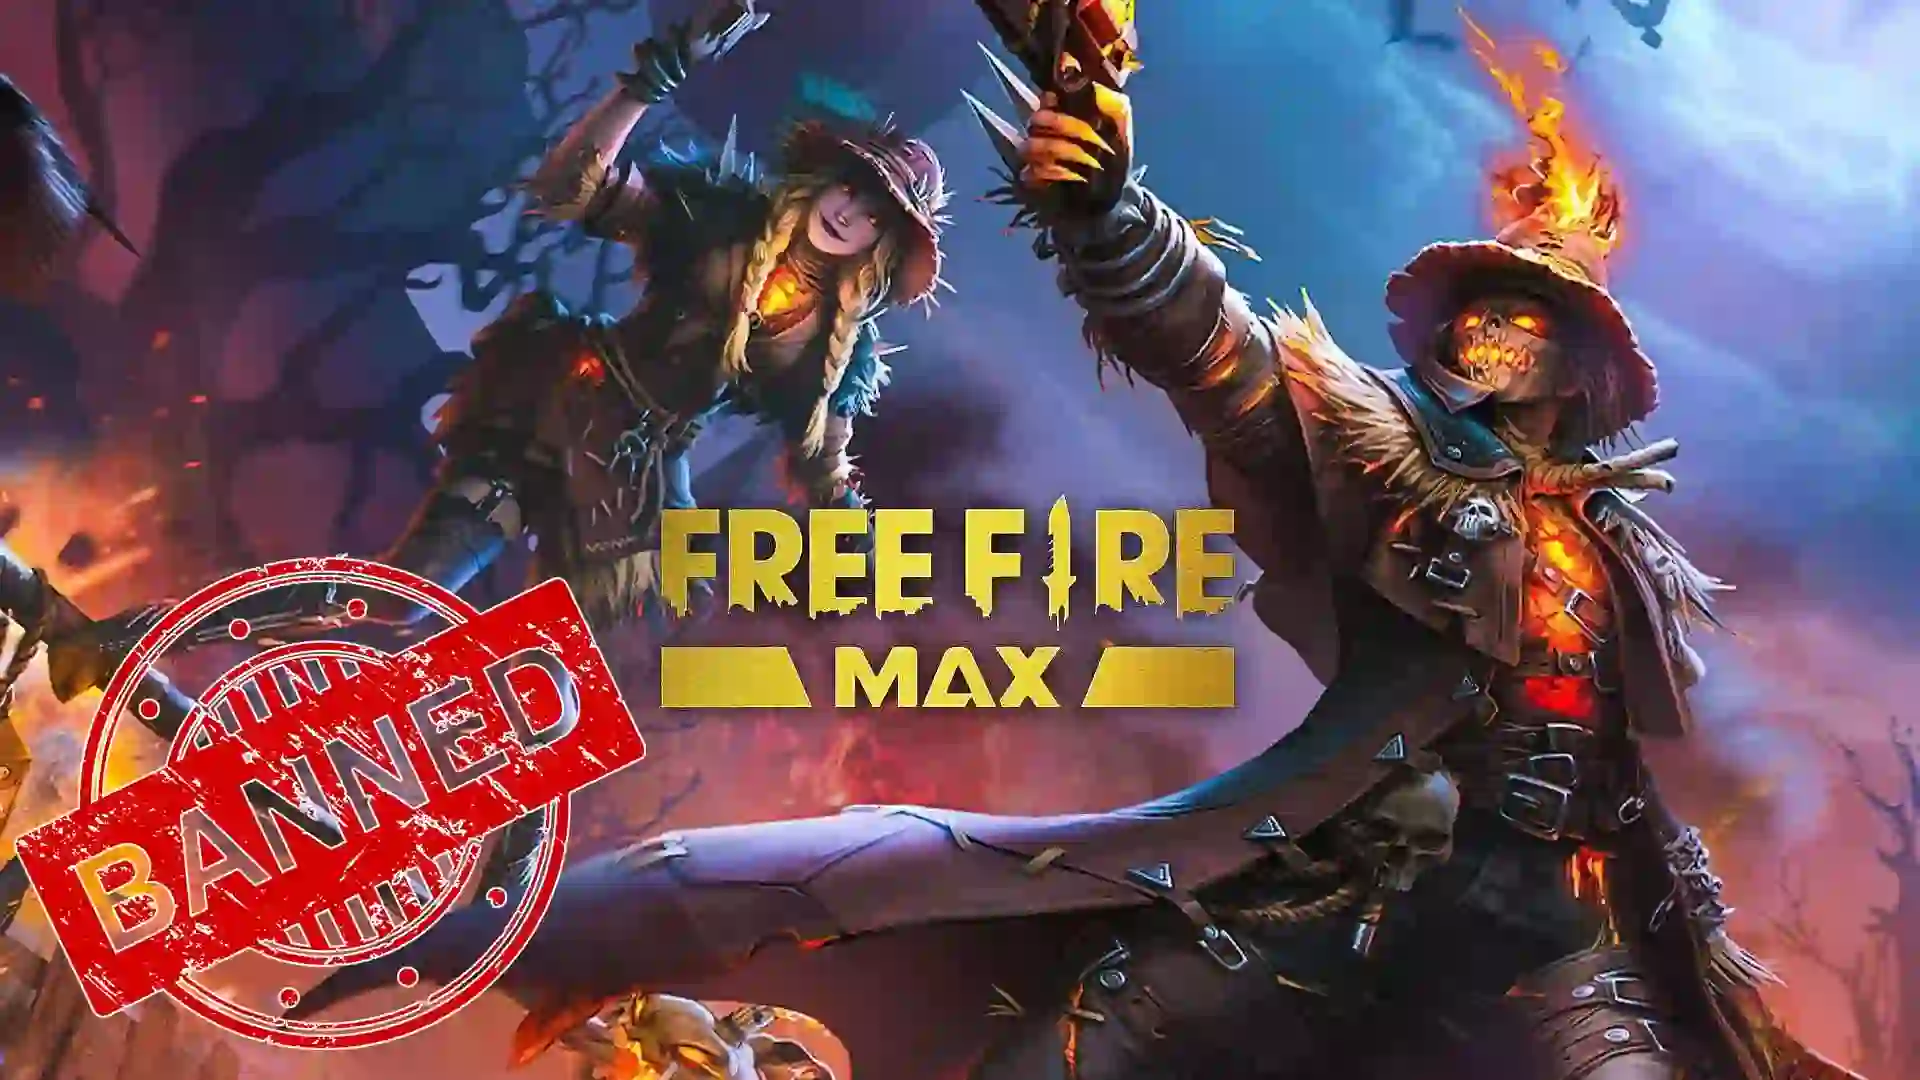 is Free Fire Max Banned in India, Free Fire Max Banned or Not